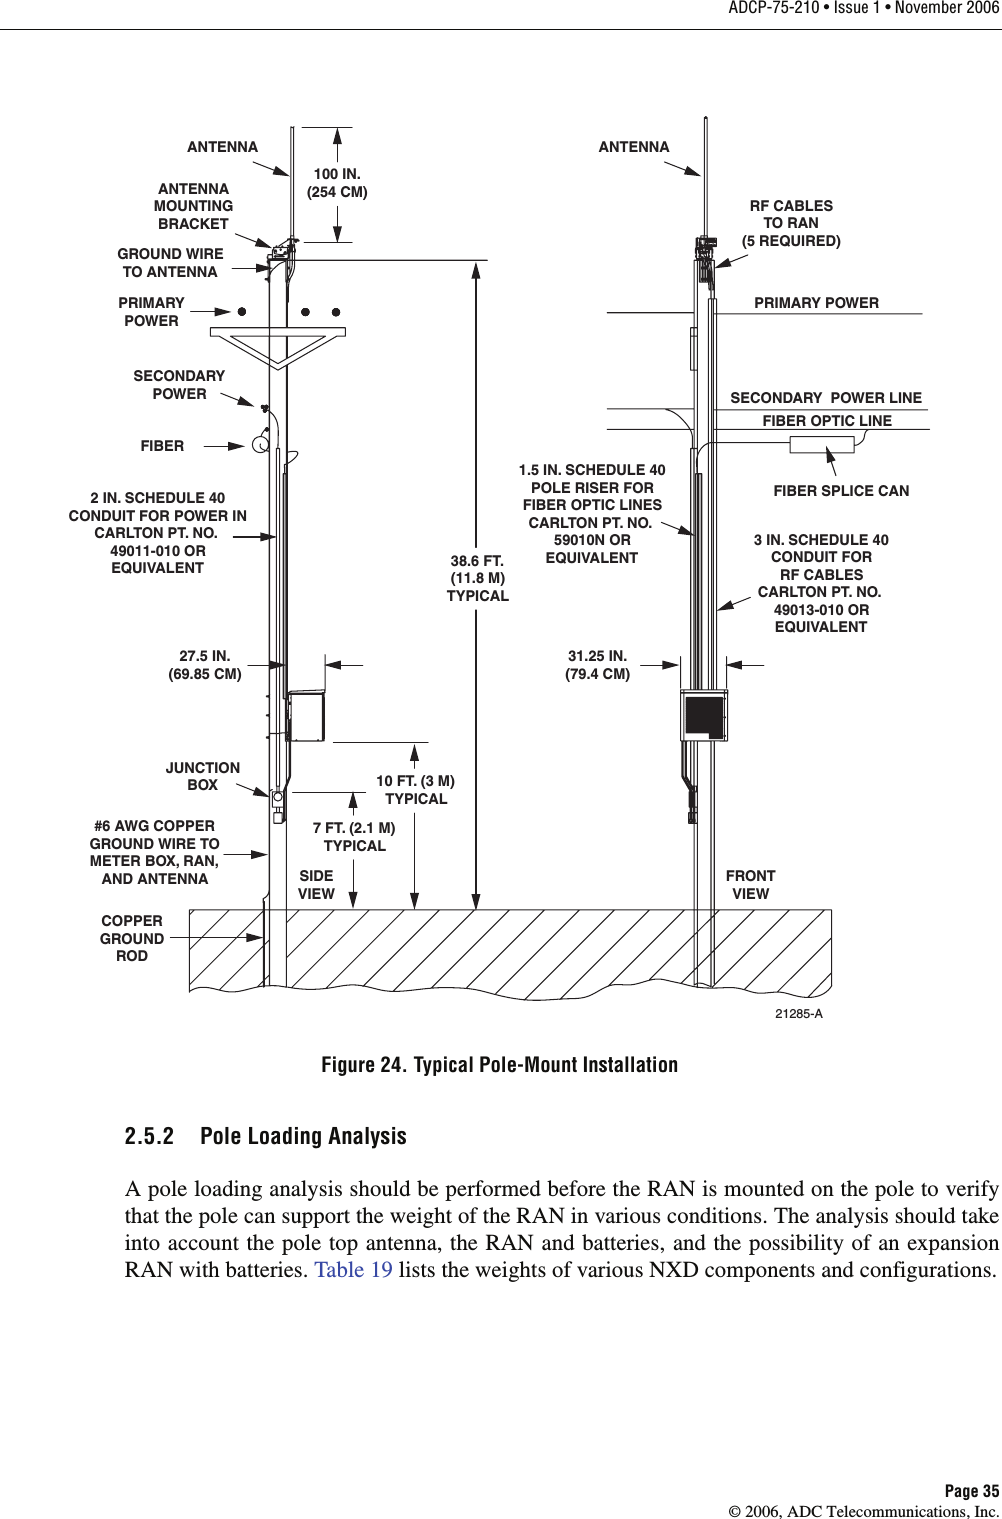 ADCP-75-210 • Issue 1 • November 2006Page 35© 2006, ADC Telecommunications, Inc.Figure 24. Typical Pole-Mount Installation2.5.2 Pole Loading AnalysisA pole loading analysis should be performed before the RAN is mounted on the pole to verifythat the pole can support the weight of the RAN in various conditions. The analysis should takeinto account the pole top antenna, the RAN and batteries, and the possibility of an expansionRAN with batteries. Table 19 lists the weights of various NXD components and configurations.21285-AANTENNA ANTENNAANTENNAMOUNTINGBRACKET100 IN.(254 CM)GROUND WIRETO ANTENNAPRIMARYPOWERPRIMARY POWERSECONDARY  POWER LINESECONDARYPOWERFIBERFIBER SPLICE CANFIBER OPTIC LINE2 IN. SCHEDULE 40CONDUIT FOR POWER INCARLTON PT. NO.49011-010 OREQUIVALENTSIDEVIEWFRONTVIEW27.5 IN.(69.85 CM)31.25 IN.(79.4 CM)7 FT. (2.1 M)TYPICALJUNCTIONBOX#6 AWG COPPERGROUND WIRE TOMETER BOX, RAN,AND ANTENNA10 FT. (3 M)TYPICAL38.6 FT.(11.8 M)TYPICAL1.5 IN. SCHEDULE 40POLE RISER FORFIBER OPTIC LINESCARLTON PT. NO.59010N OREQUIVALENT3 IN. SCHEDULE 40CONDUIT FORRF CABLESCARLTON PT. NO.49013-010 OREQUIVALENTRF CABLESTO RAN(5 REQUIRED)COPPERGROUNDROD